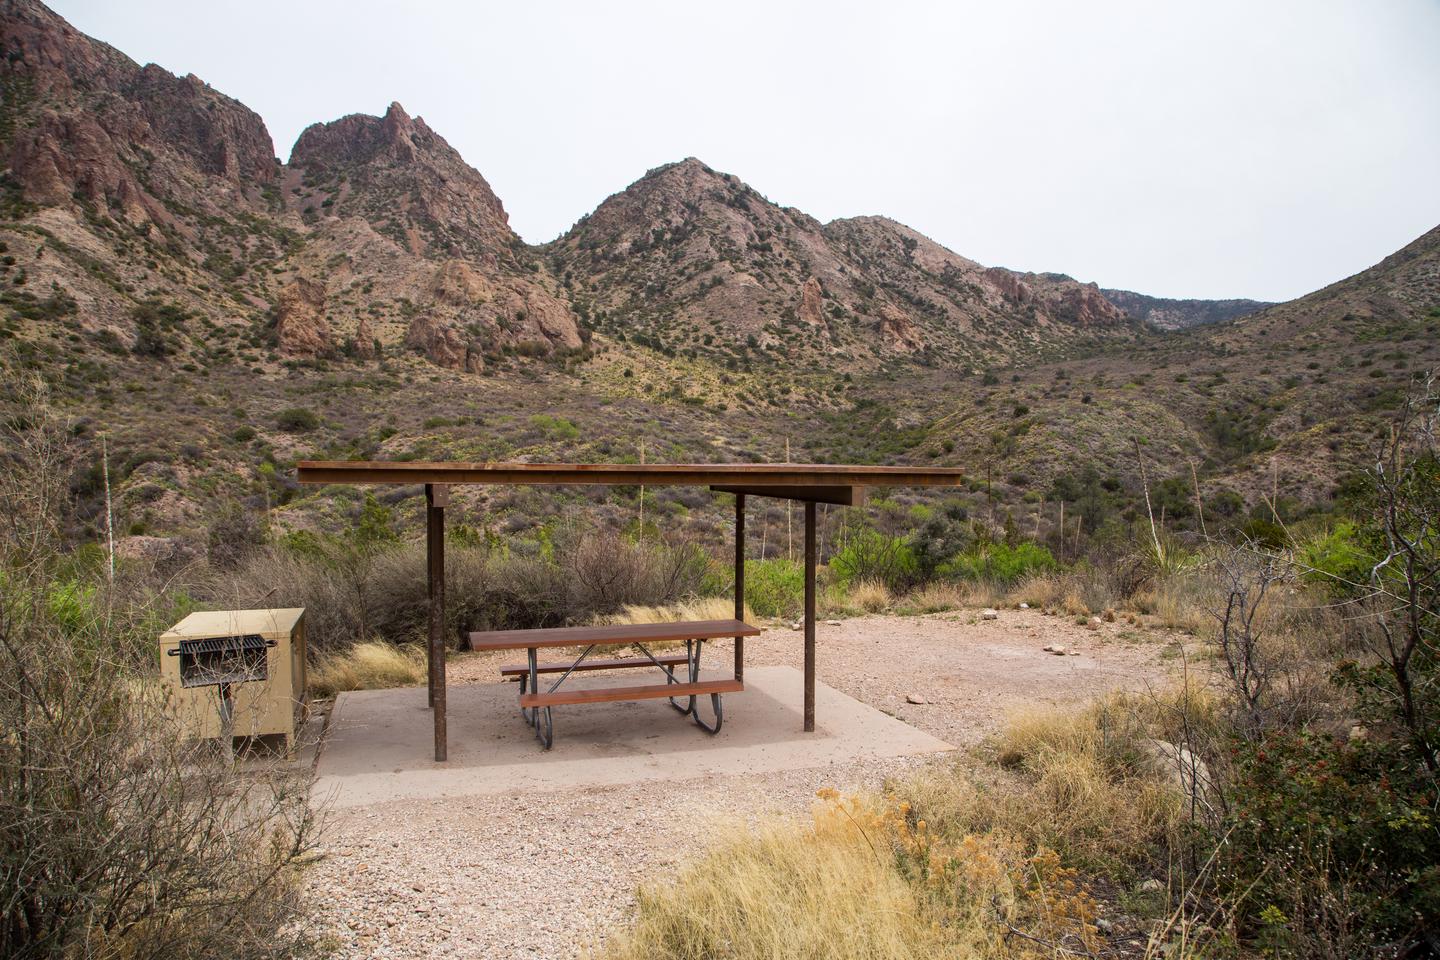 Mountains surround this campground and site. Shade shelter provides added sun protection.